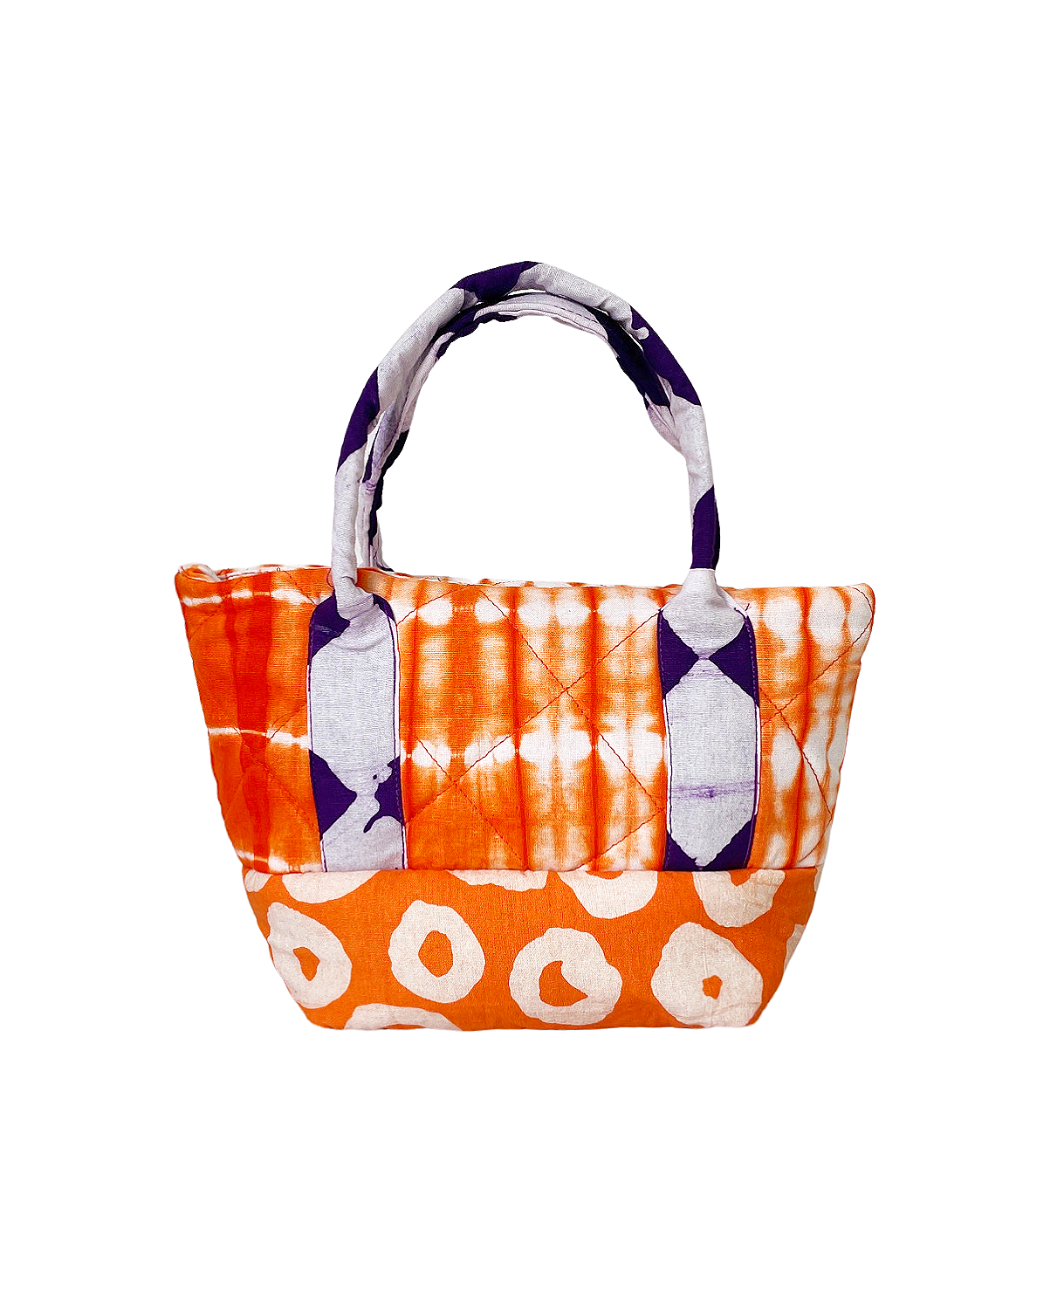 purse, vacation, outfit, tote, mini, handbag, colorful, orange, print, carryall, Fashion, West Africa, Gift, travel, vacation, lounge, comfy, family, trip, luxury, Ghana, new arrivals, Studio 189, Cotton, clothing, comfy, chic